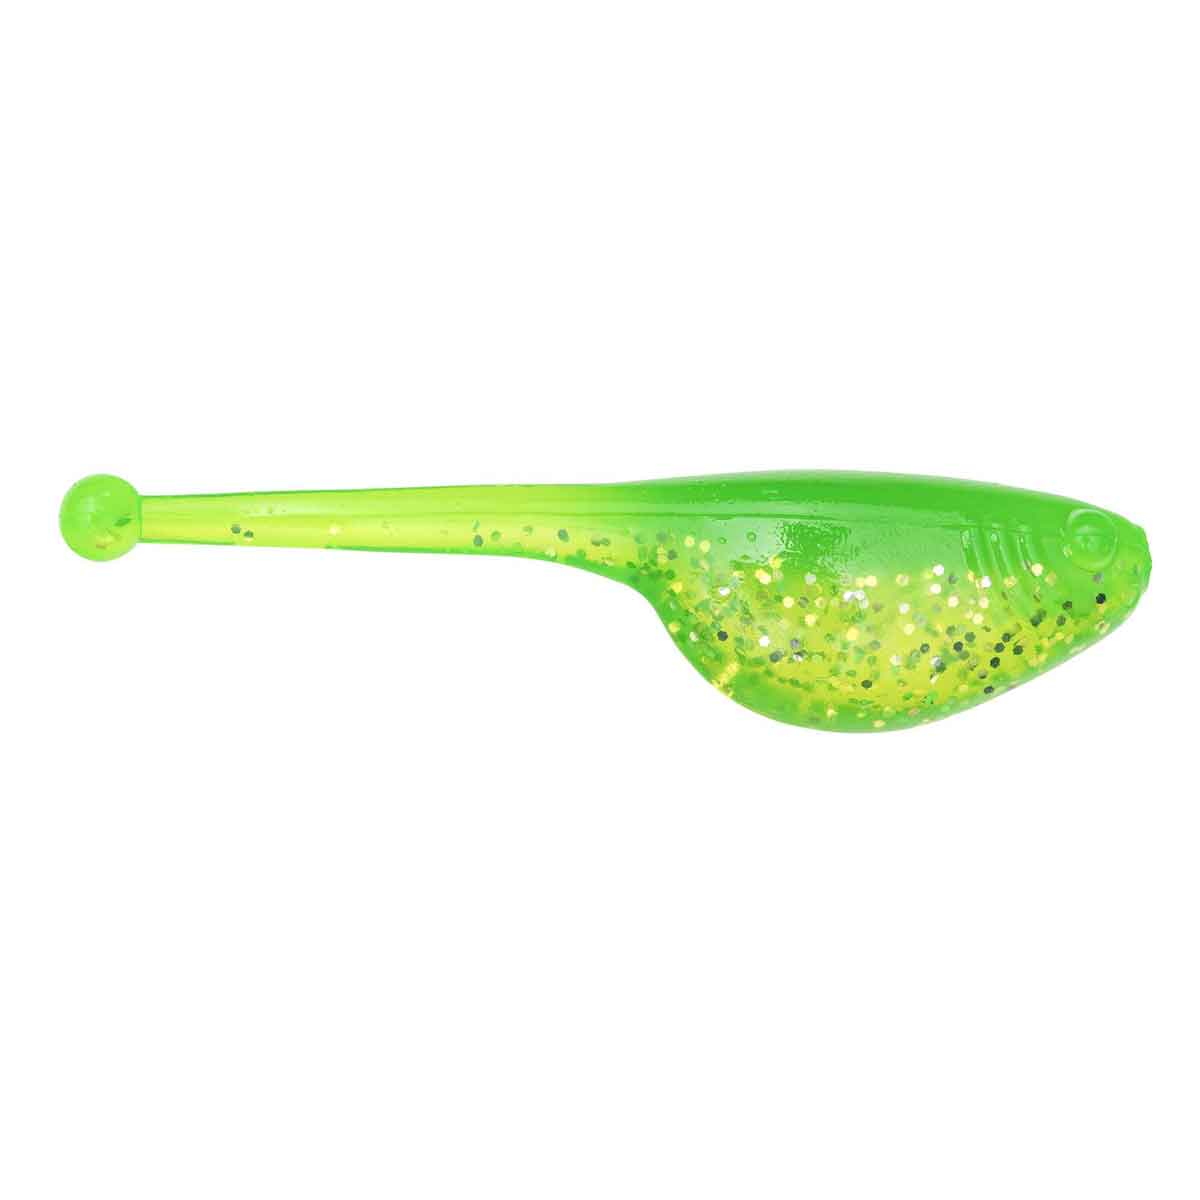 Mr. Crappie Shadpole_Electric Lime